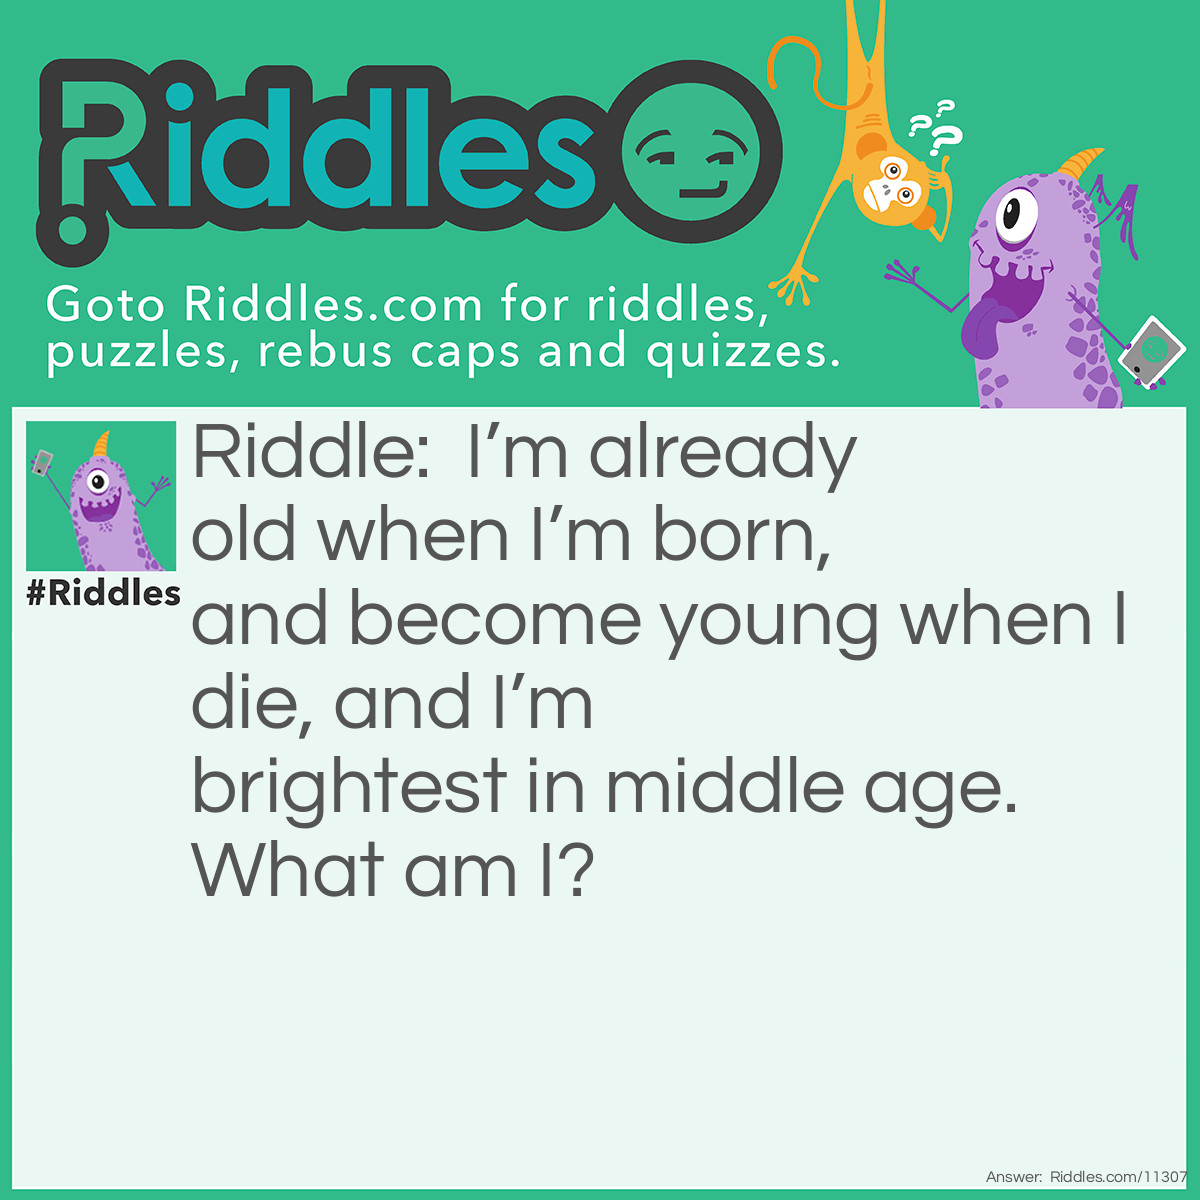 Riddle: I'm already old when I'm born, and become young when I die, and I’m brightest in middle age. What am I? Answer: A star! Also acceptable: the sun.